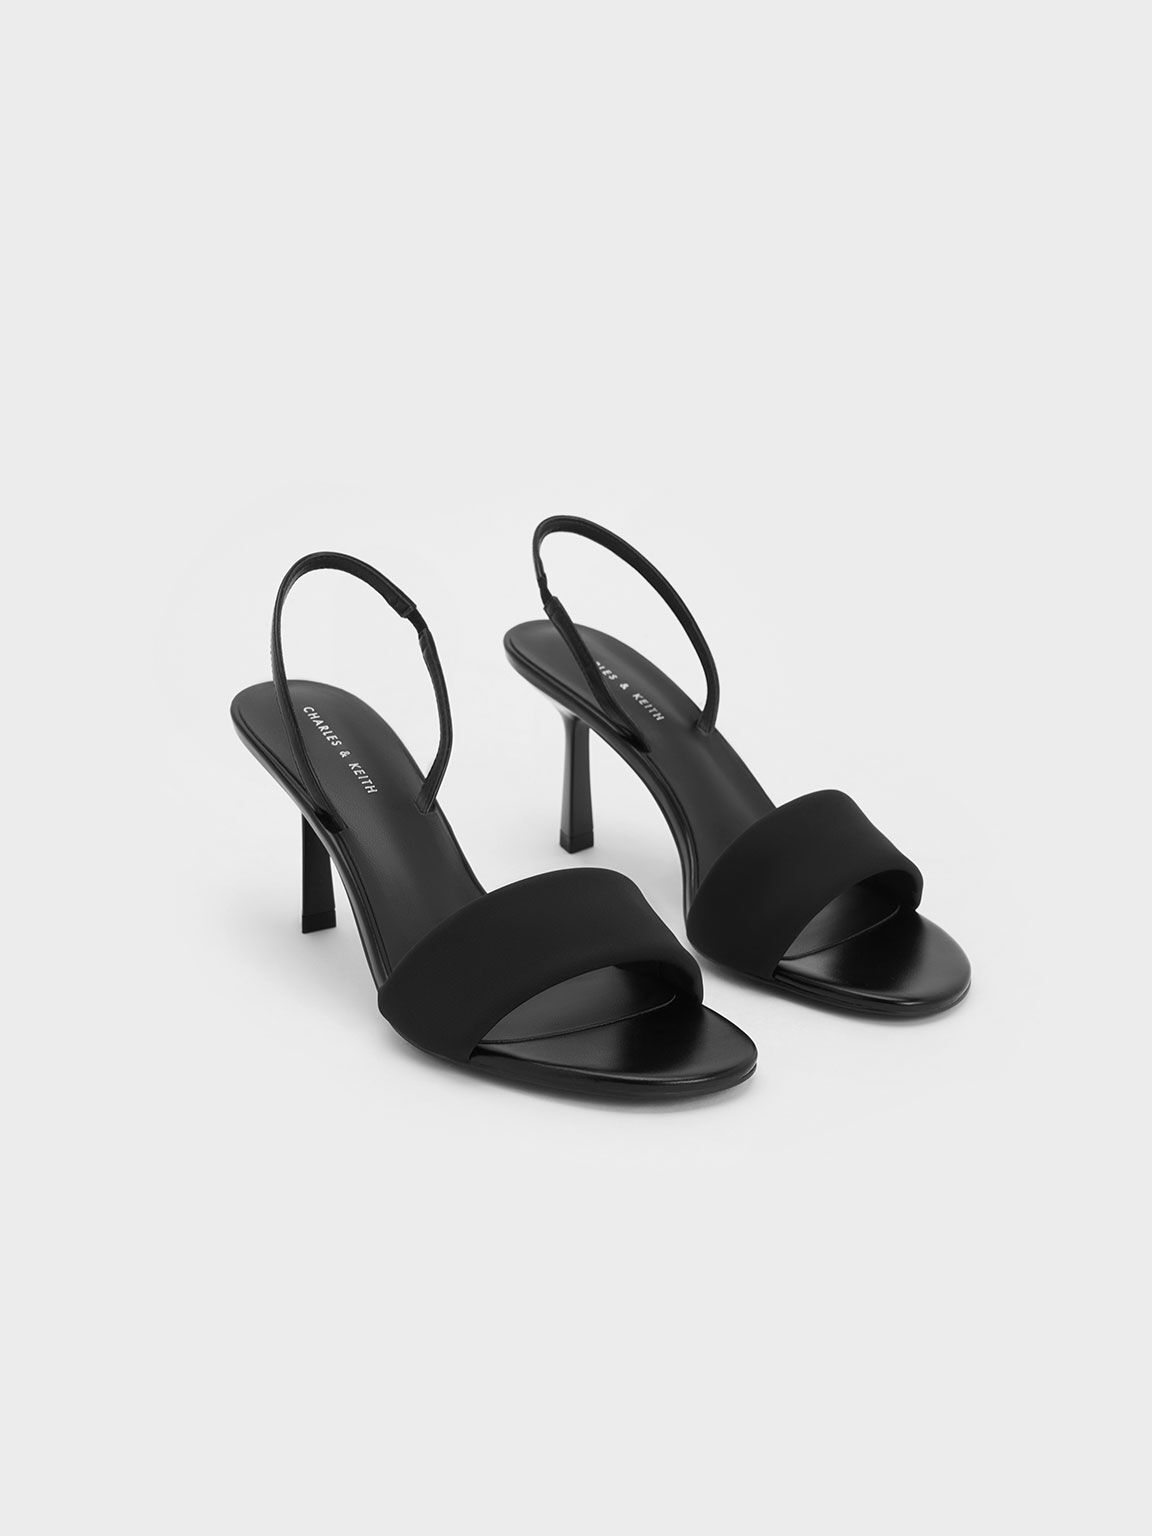 Charles & Keith - Ankle Strap Heeled Sandals - Valiram Group